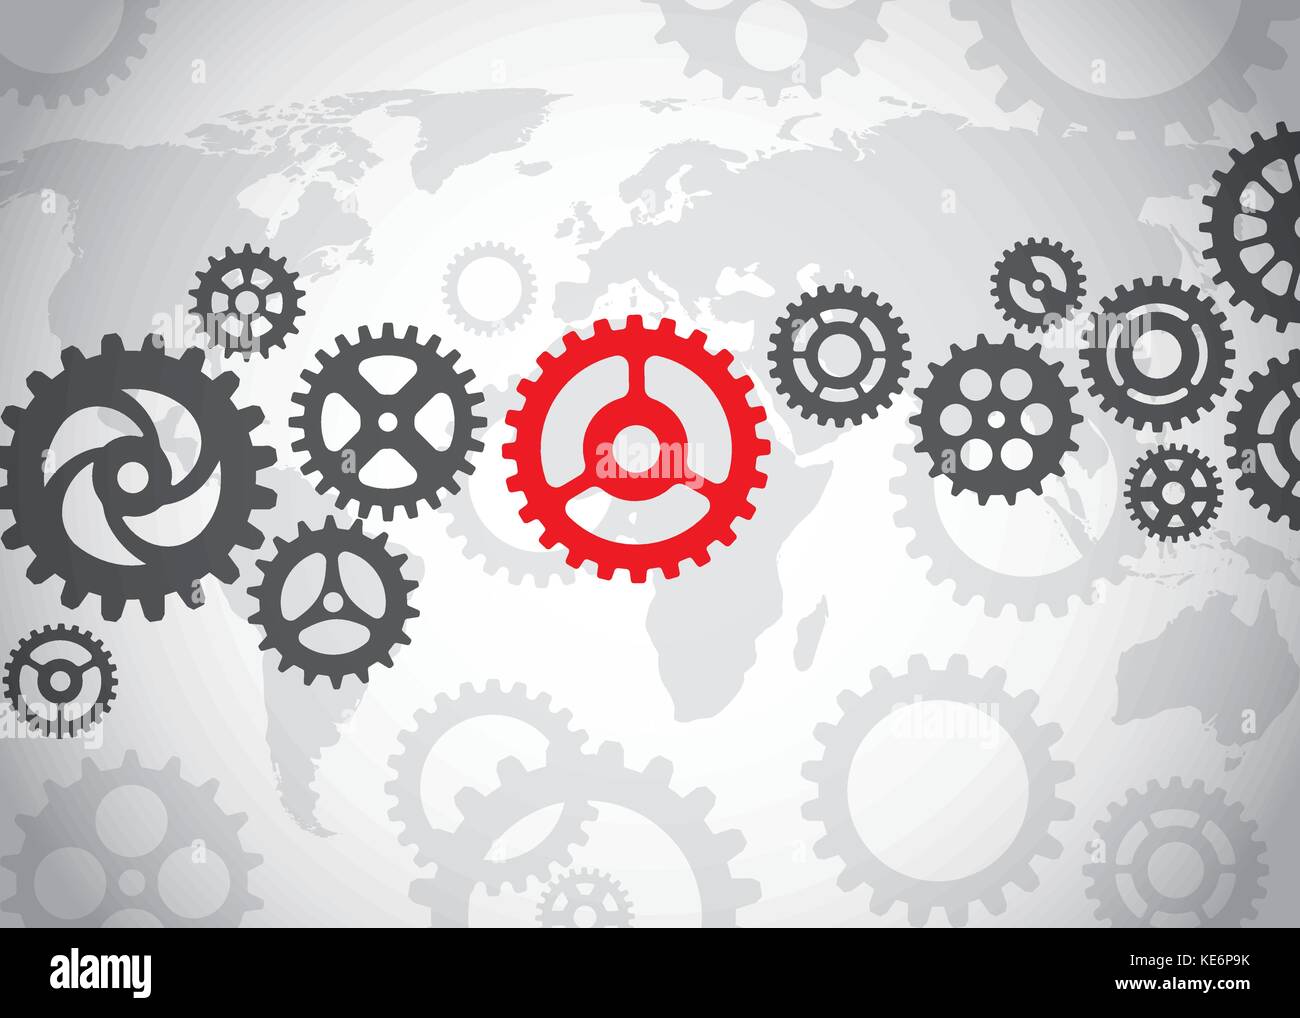 Gears on the world background Stock Vector